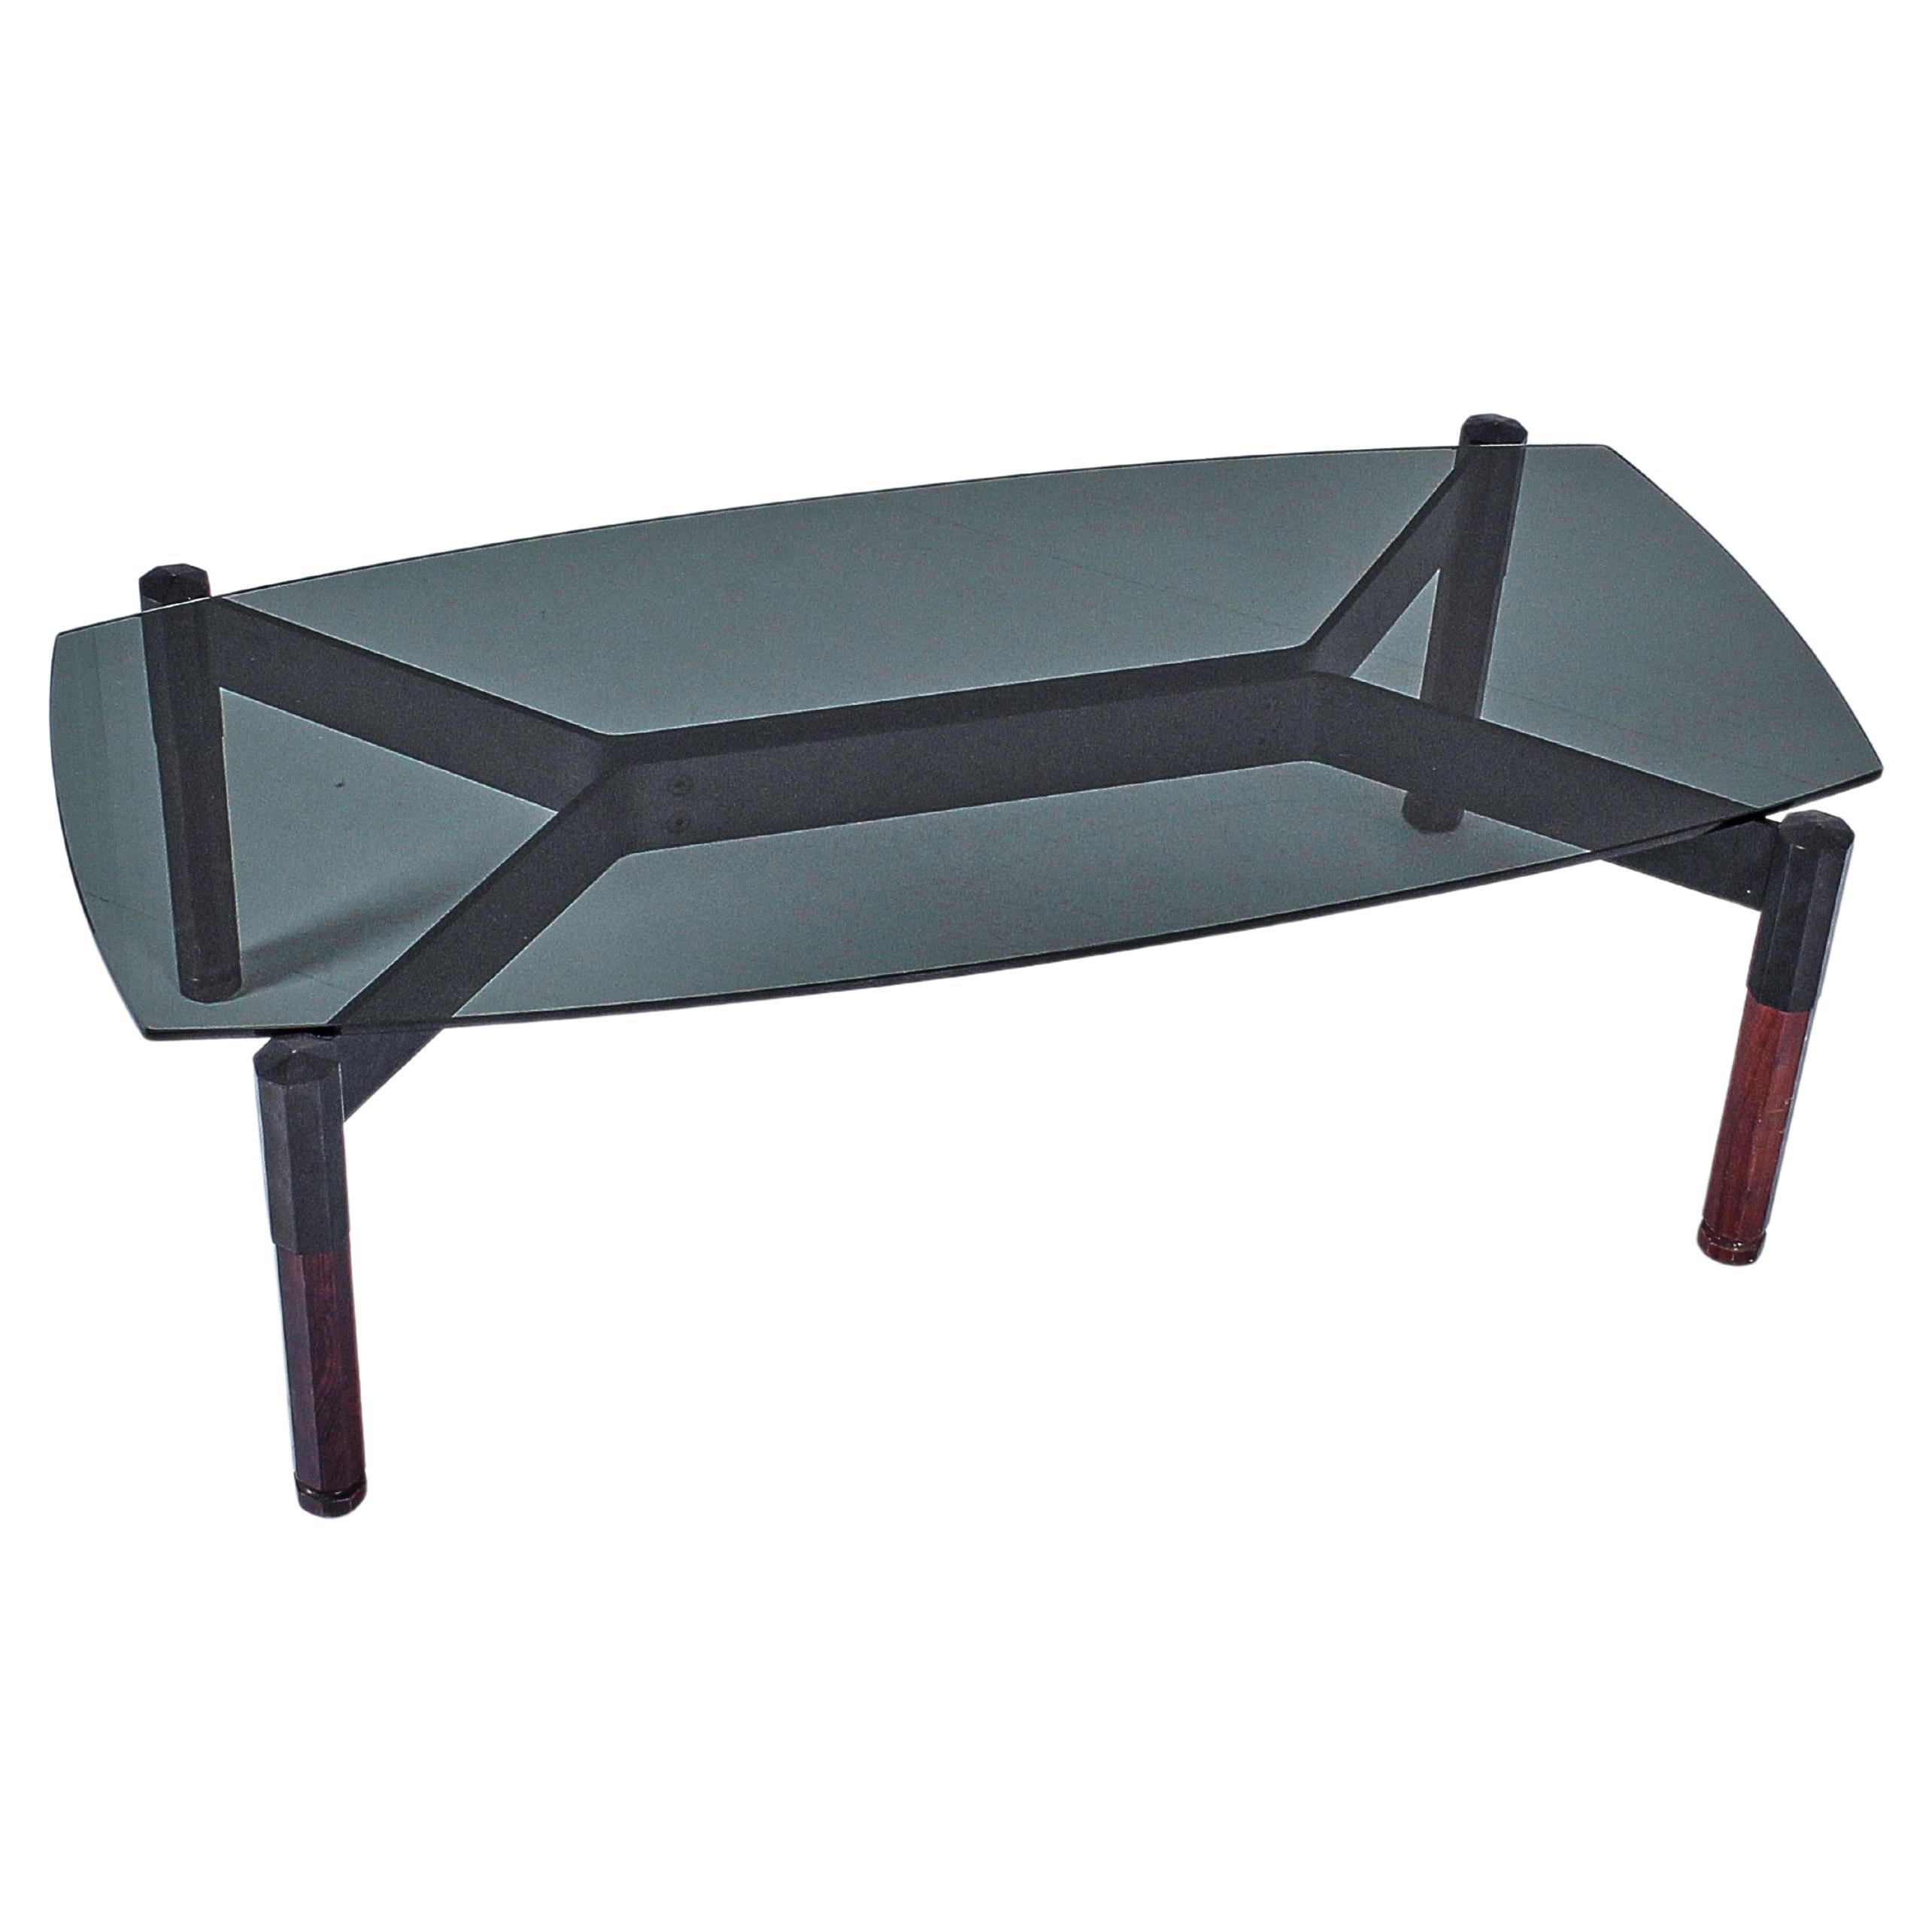 Elegant coffee table with shaped smoked glass top on geometric black metal support on four octagonal wooden feet. Attributed to Gianni Moscatelli for Formanova, Italian production in the 70s.
Wear consistent with age and use.